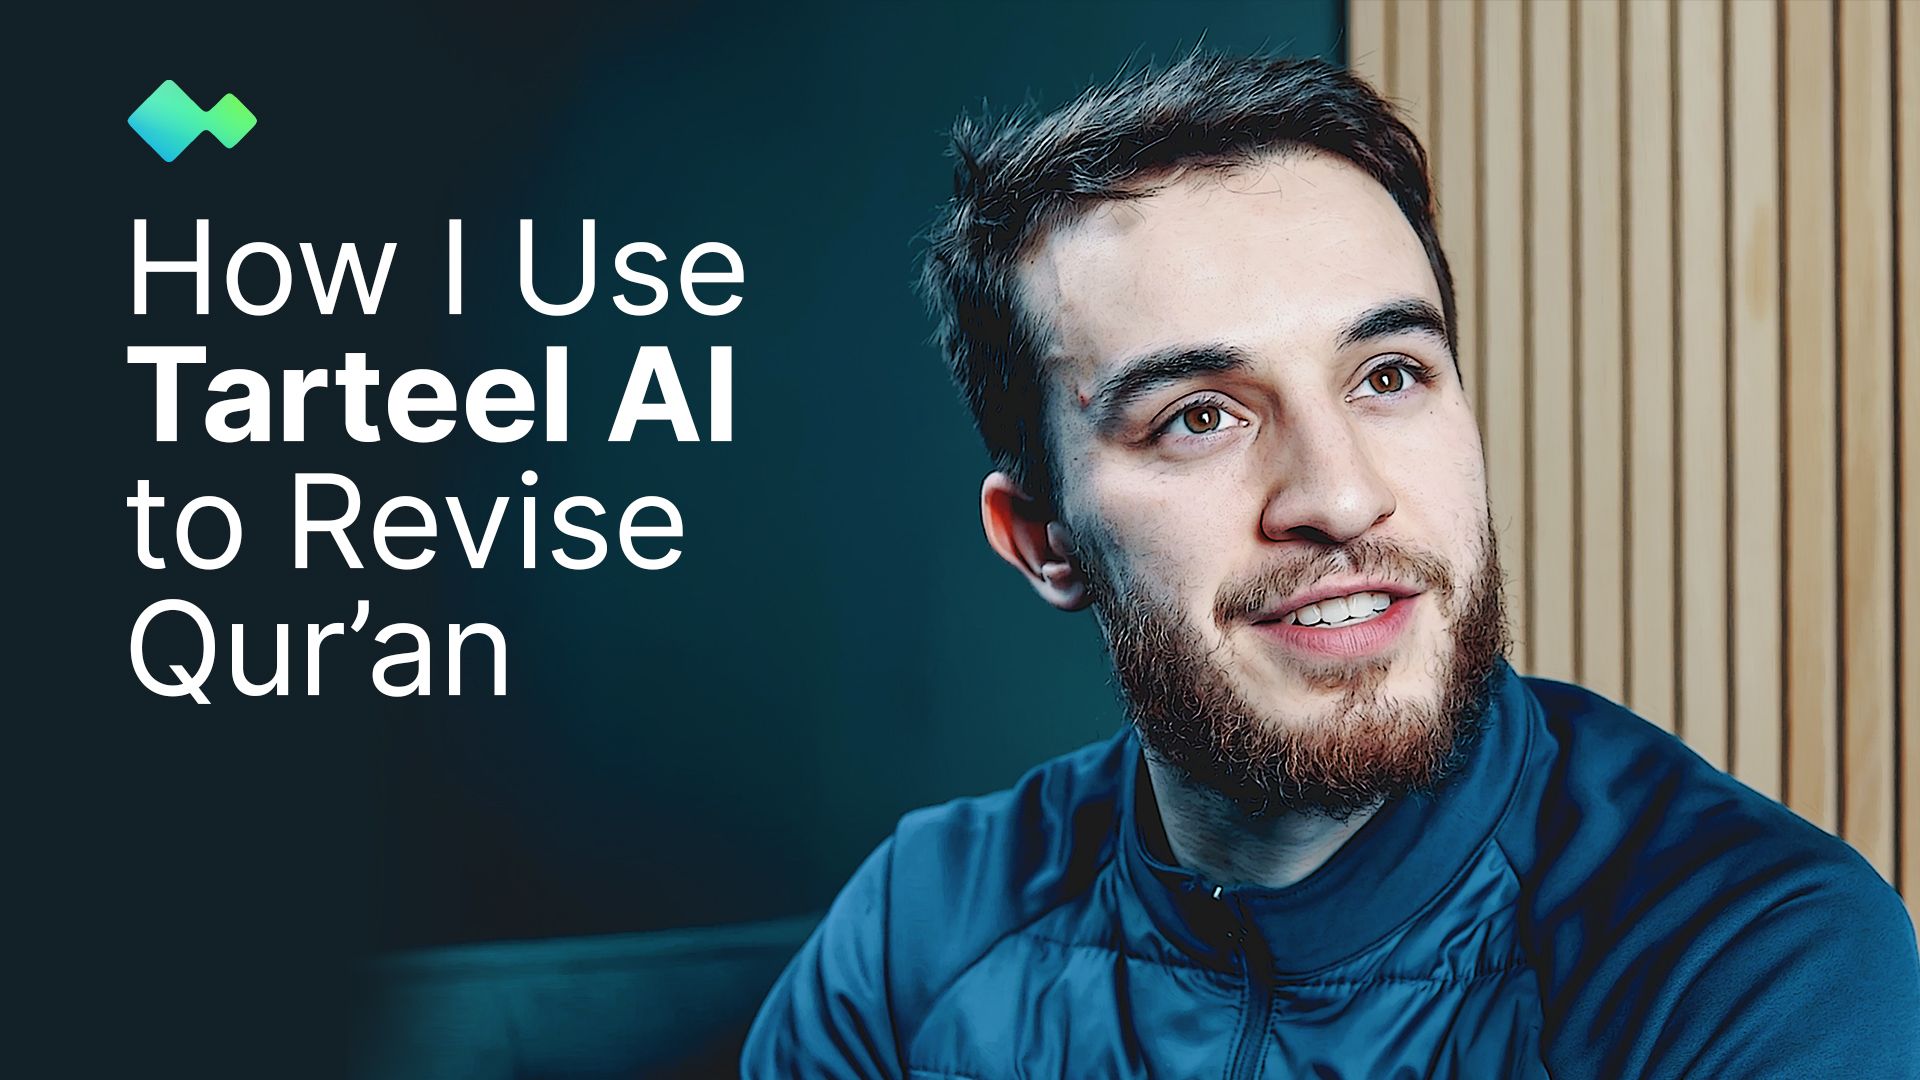 Case Study: How I Use Tarteel A.I to Revise the Quran